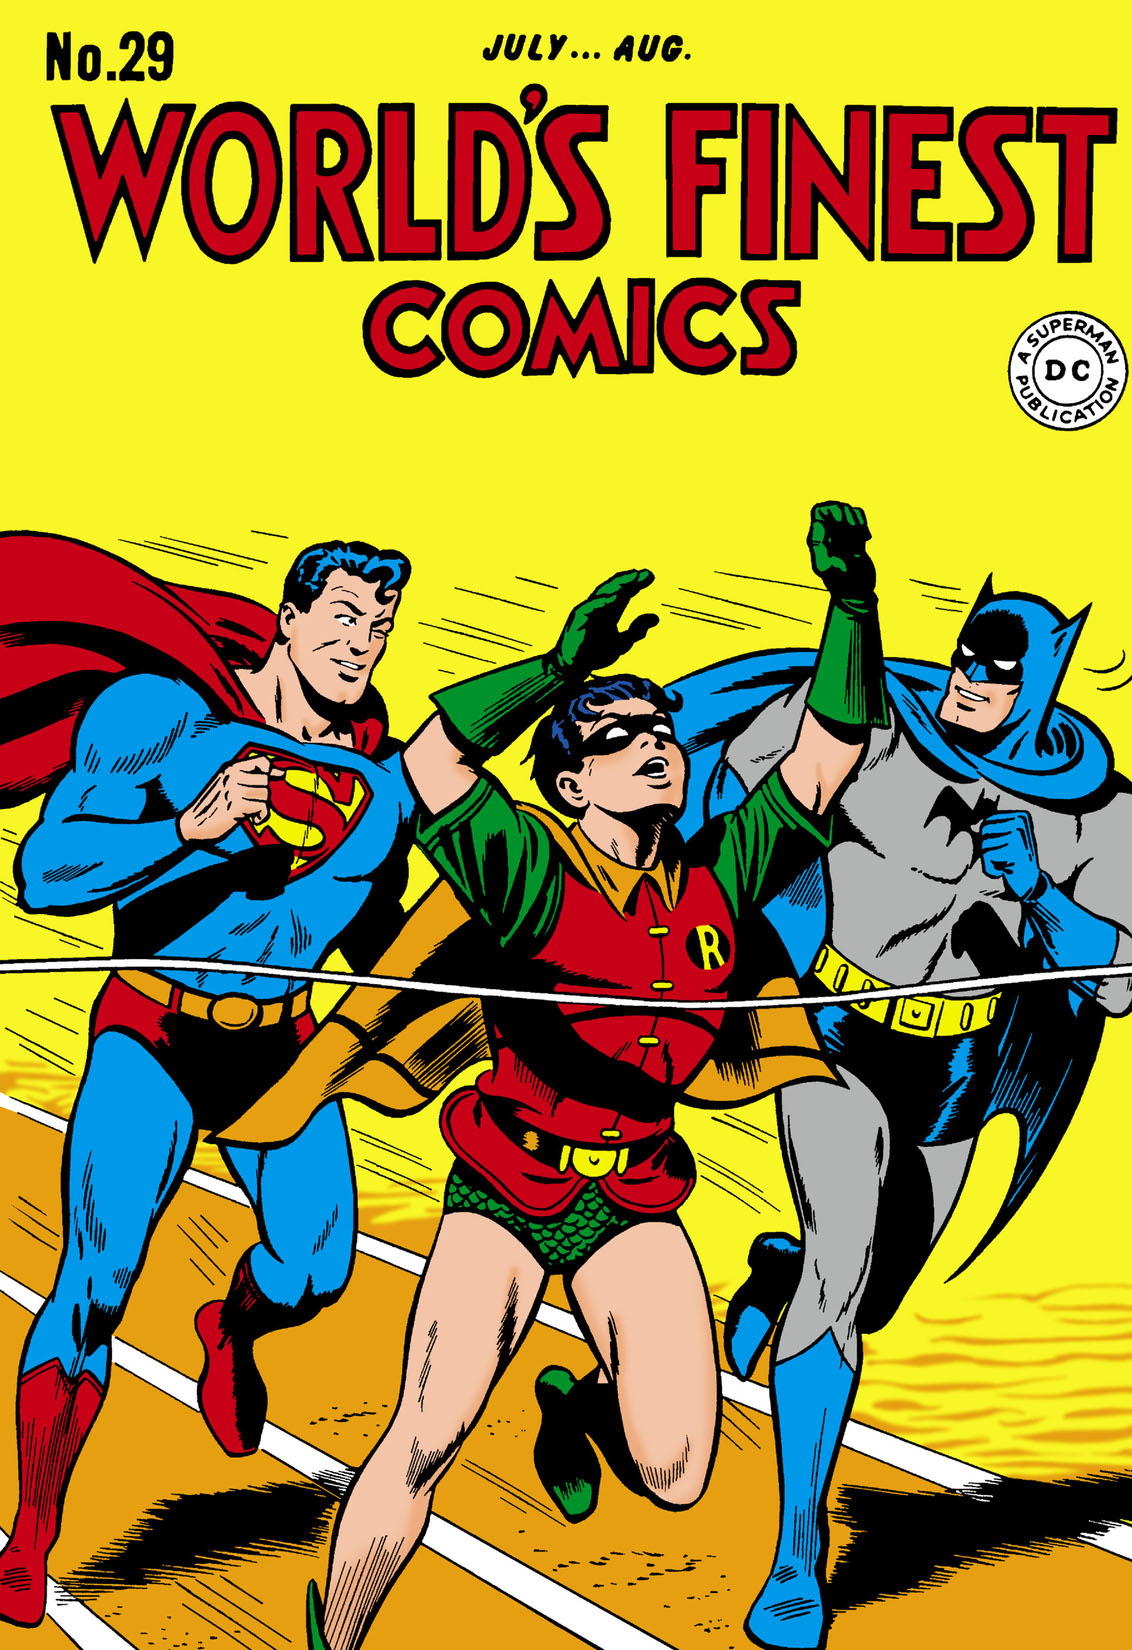 World's Finest Comics (1941-) #29 preview images